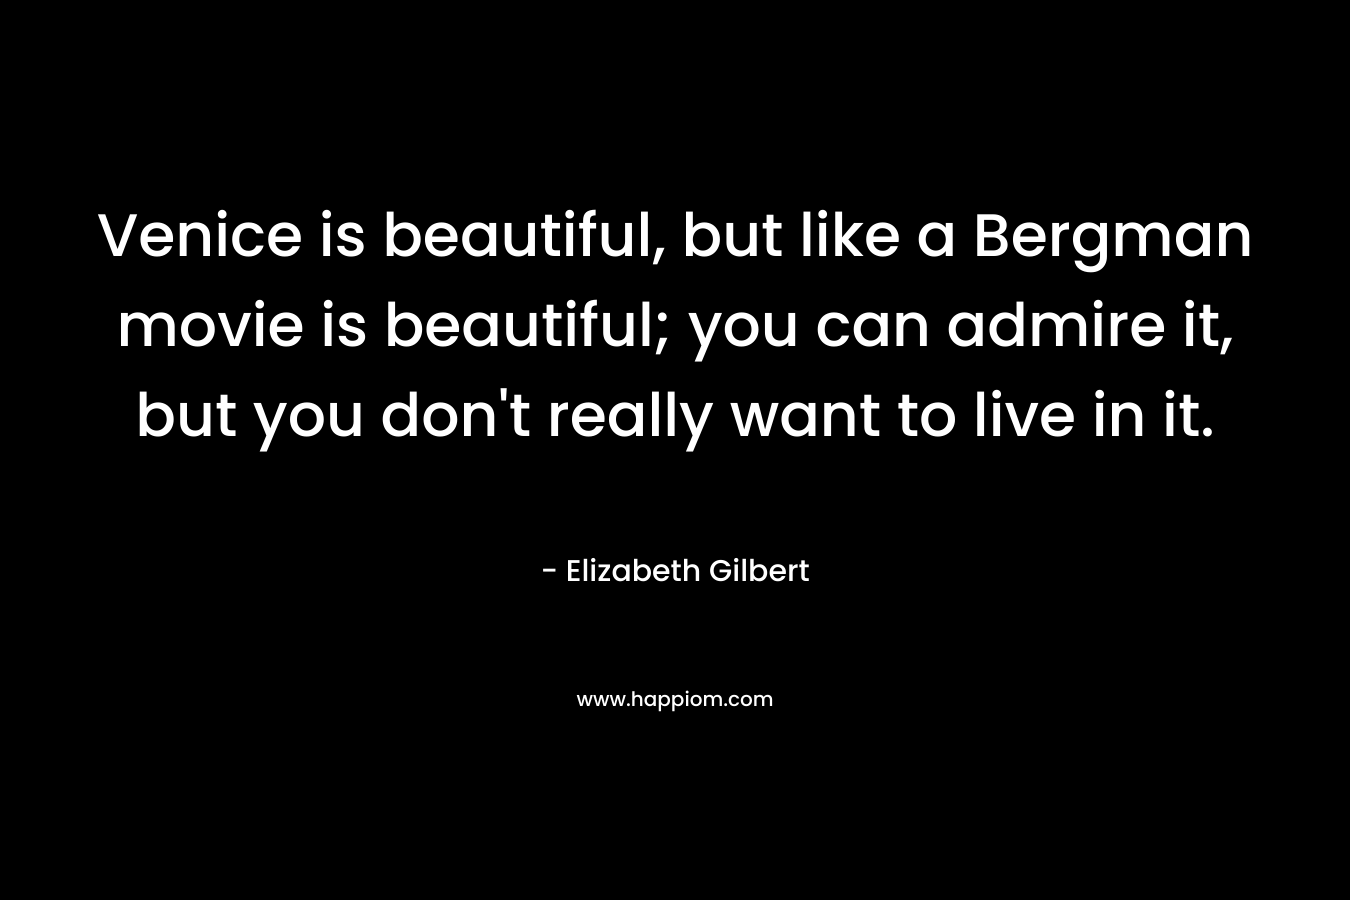 Venice is beautiful, but like a Bergman movie is beautiful; you can admire it, but you don’t really want to live in it. – Elizabeth Gilbert